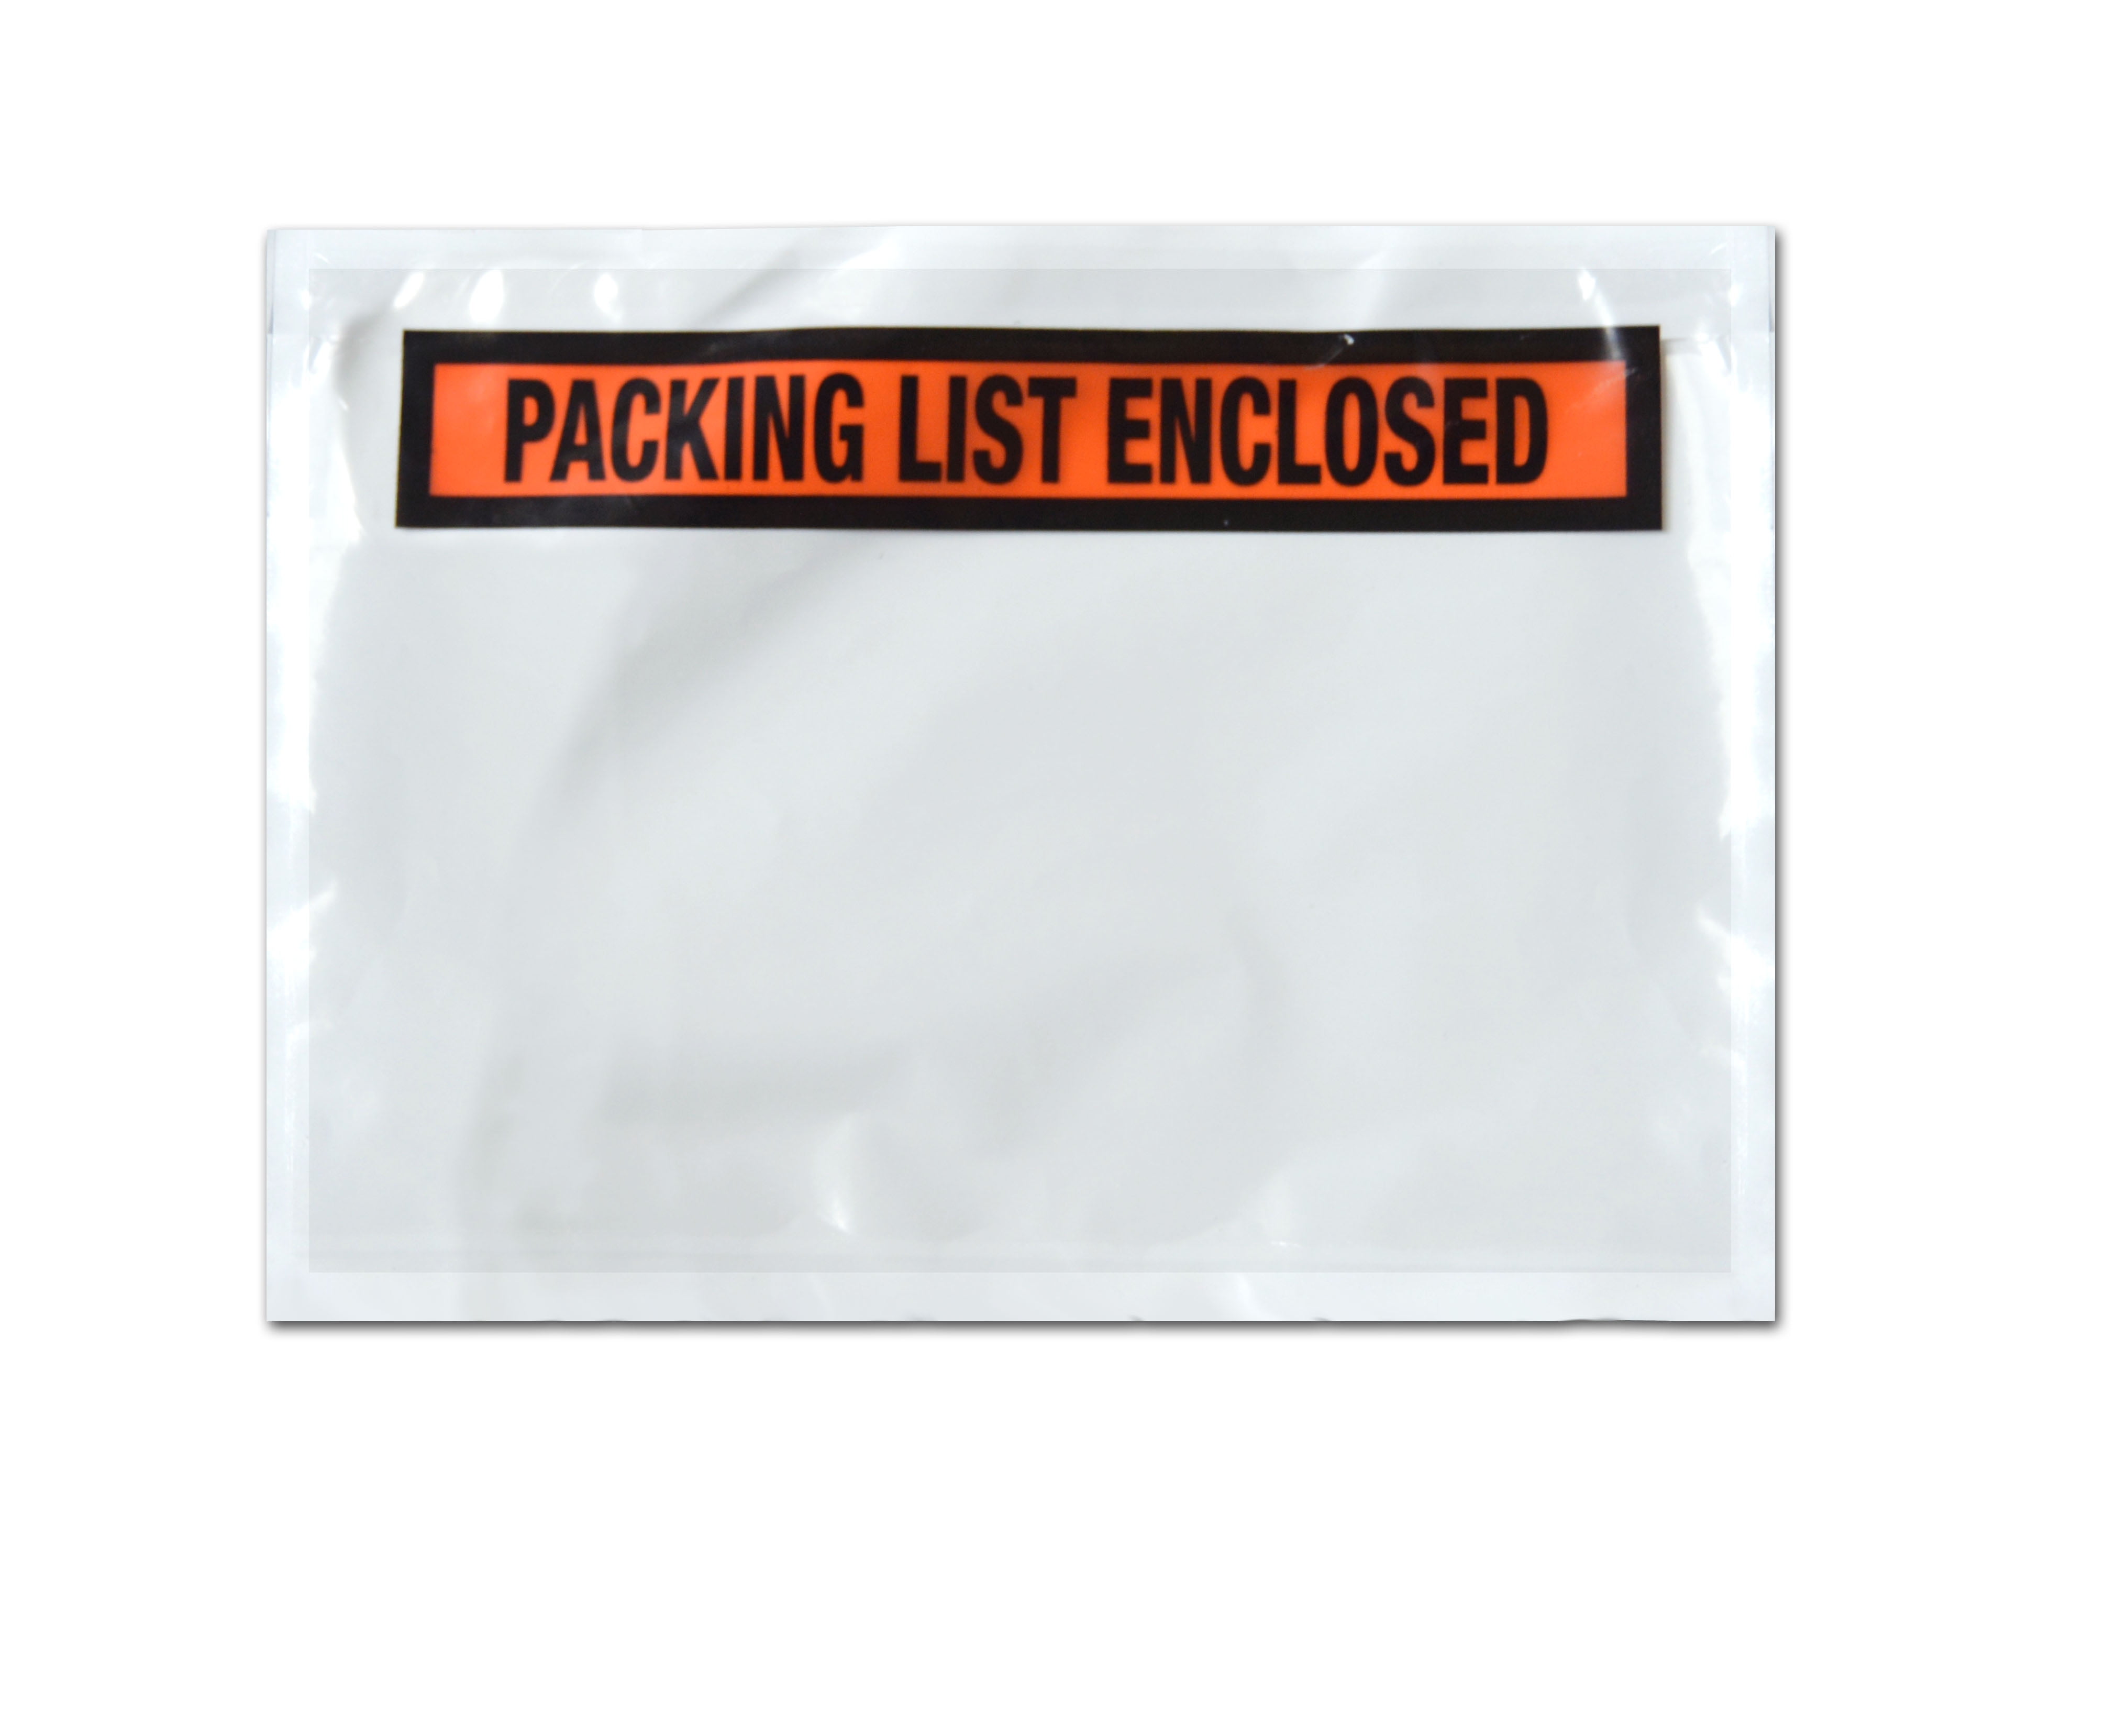 100Pc 4.5' X 5.5' Packing List Enclosed Invoice/Shipping Label Envelopes Pouches 